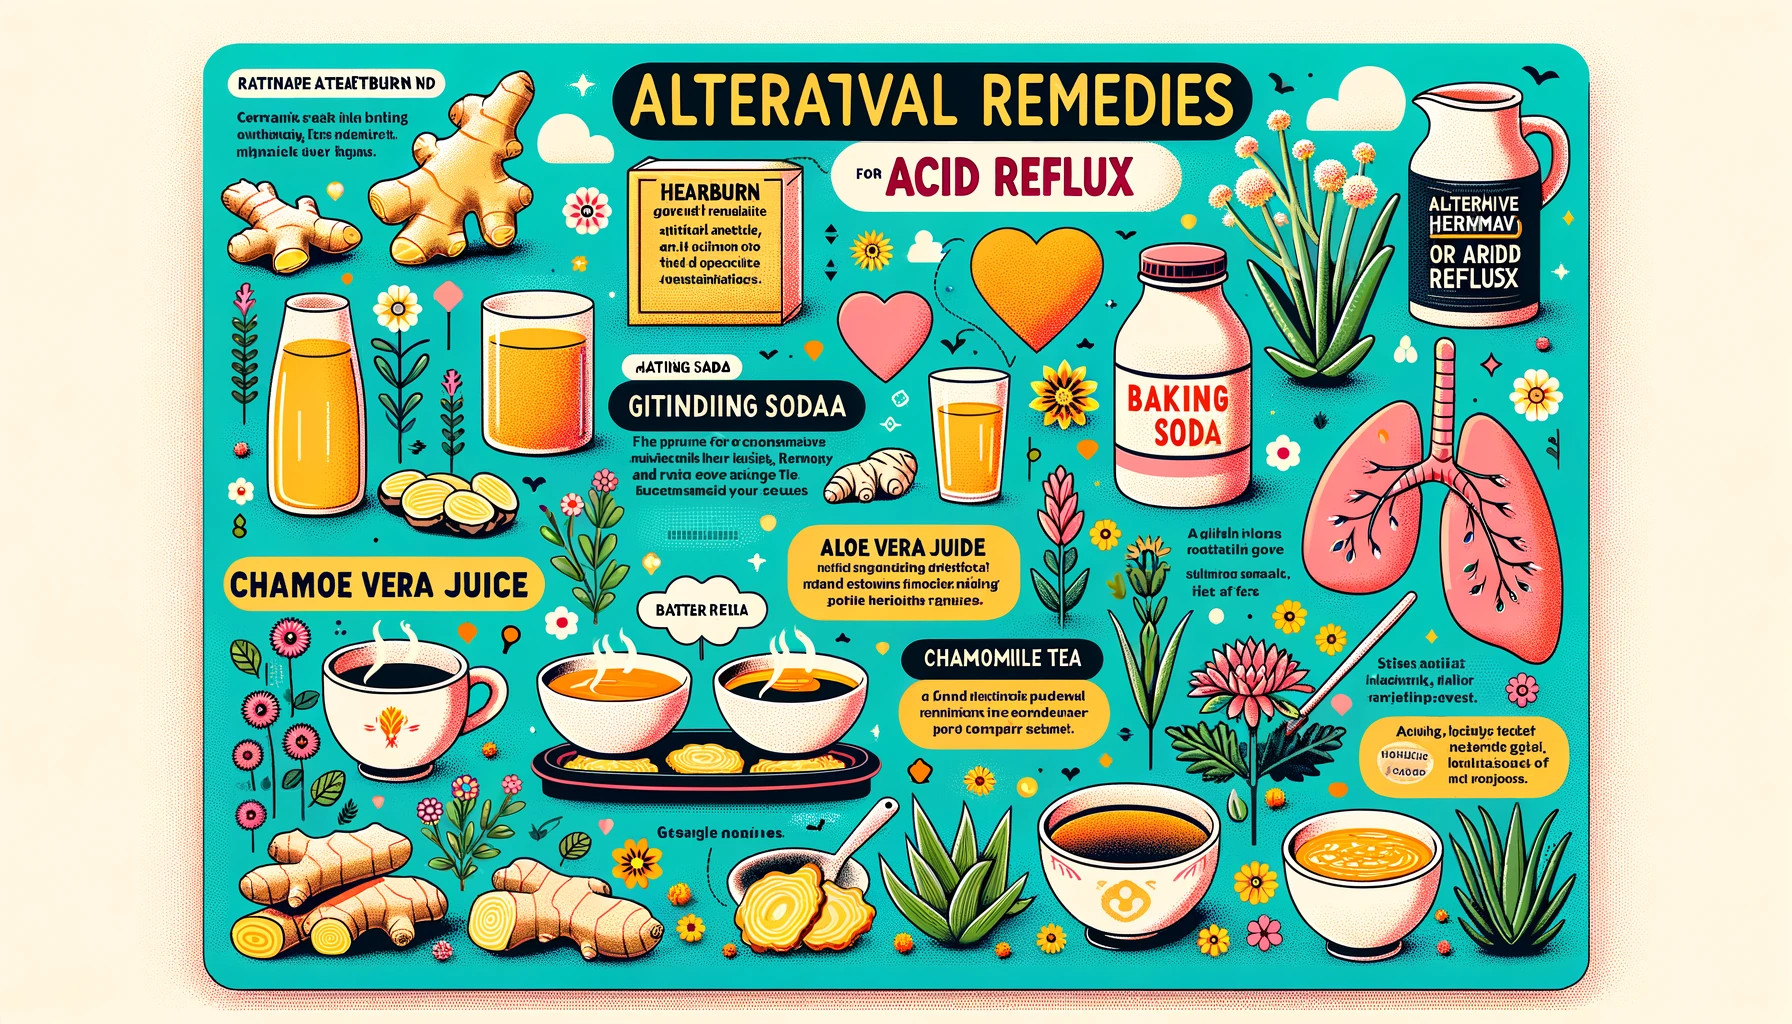 Alternative natural remedies for heartburn and acid reflux, including ginger, baking soda, aloe vera juice, and chamomile tea